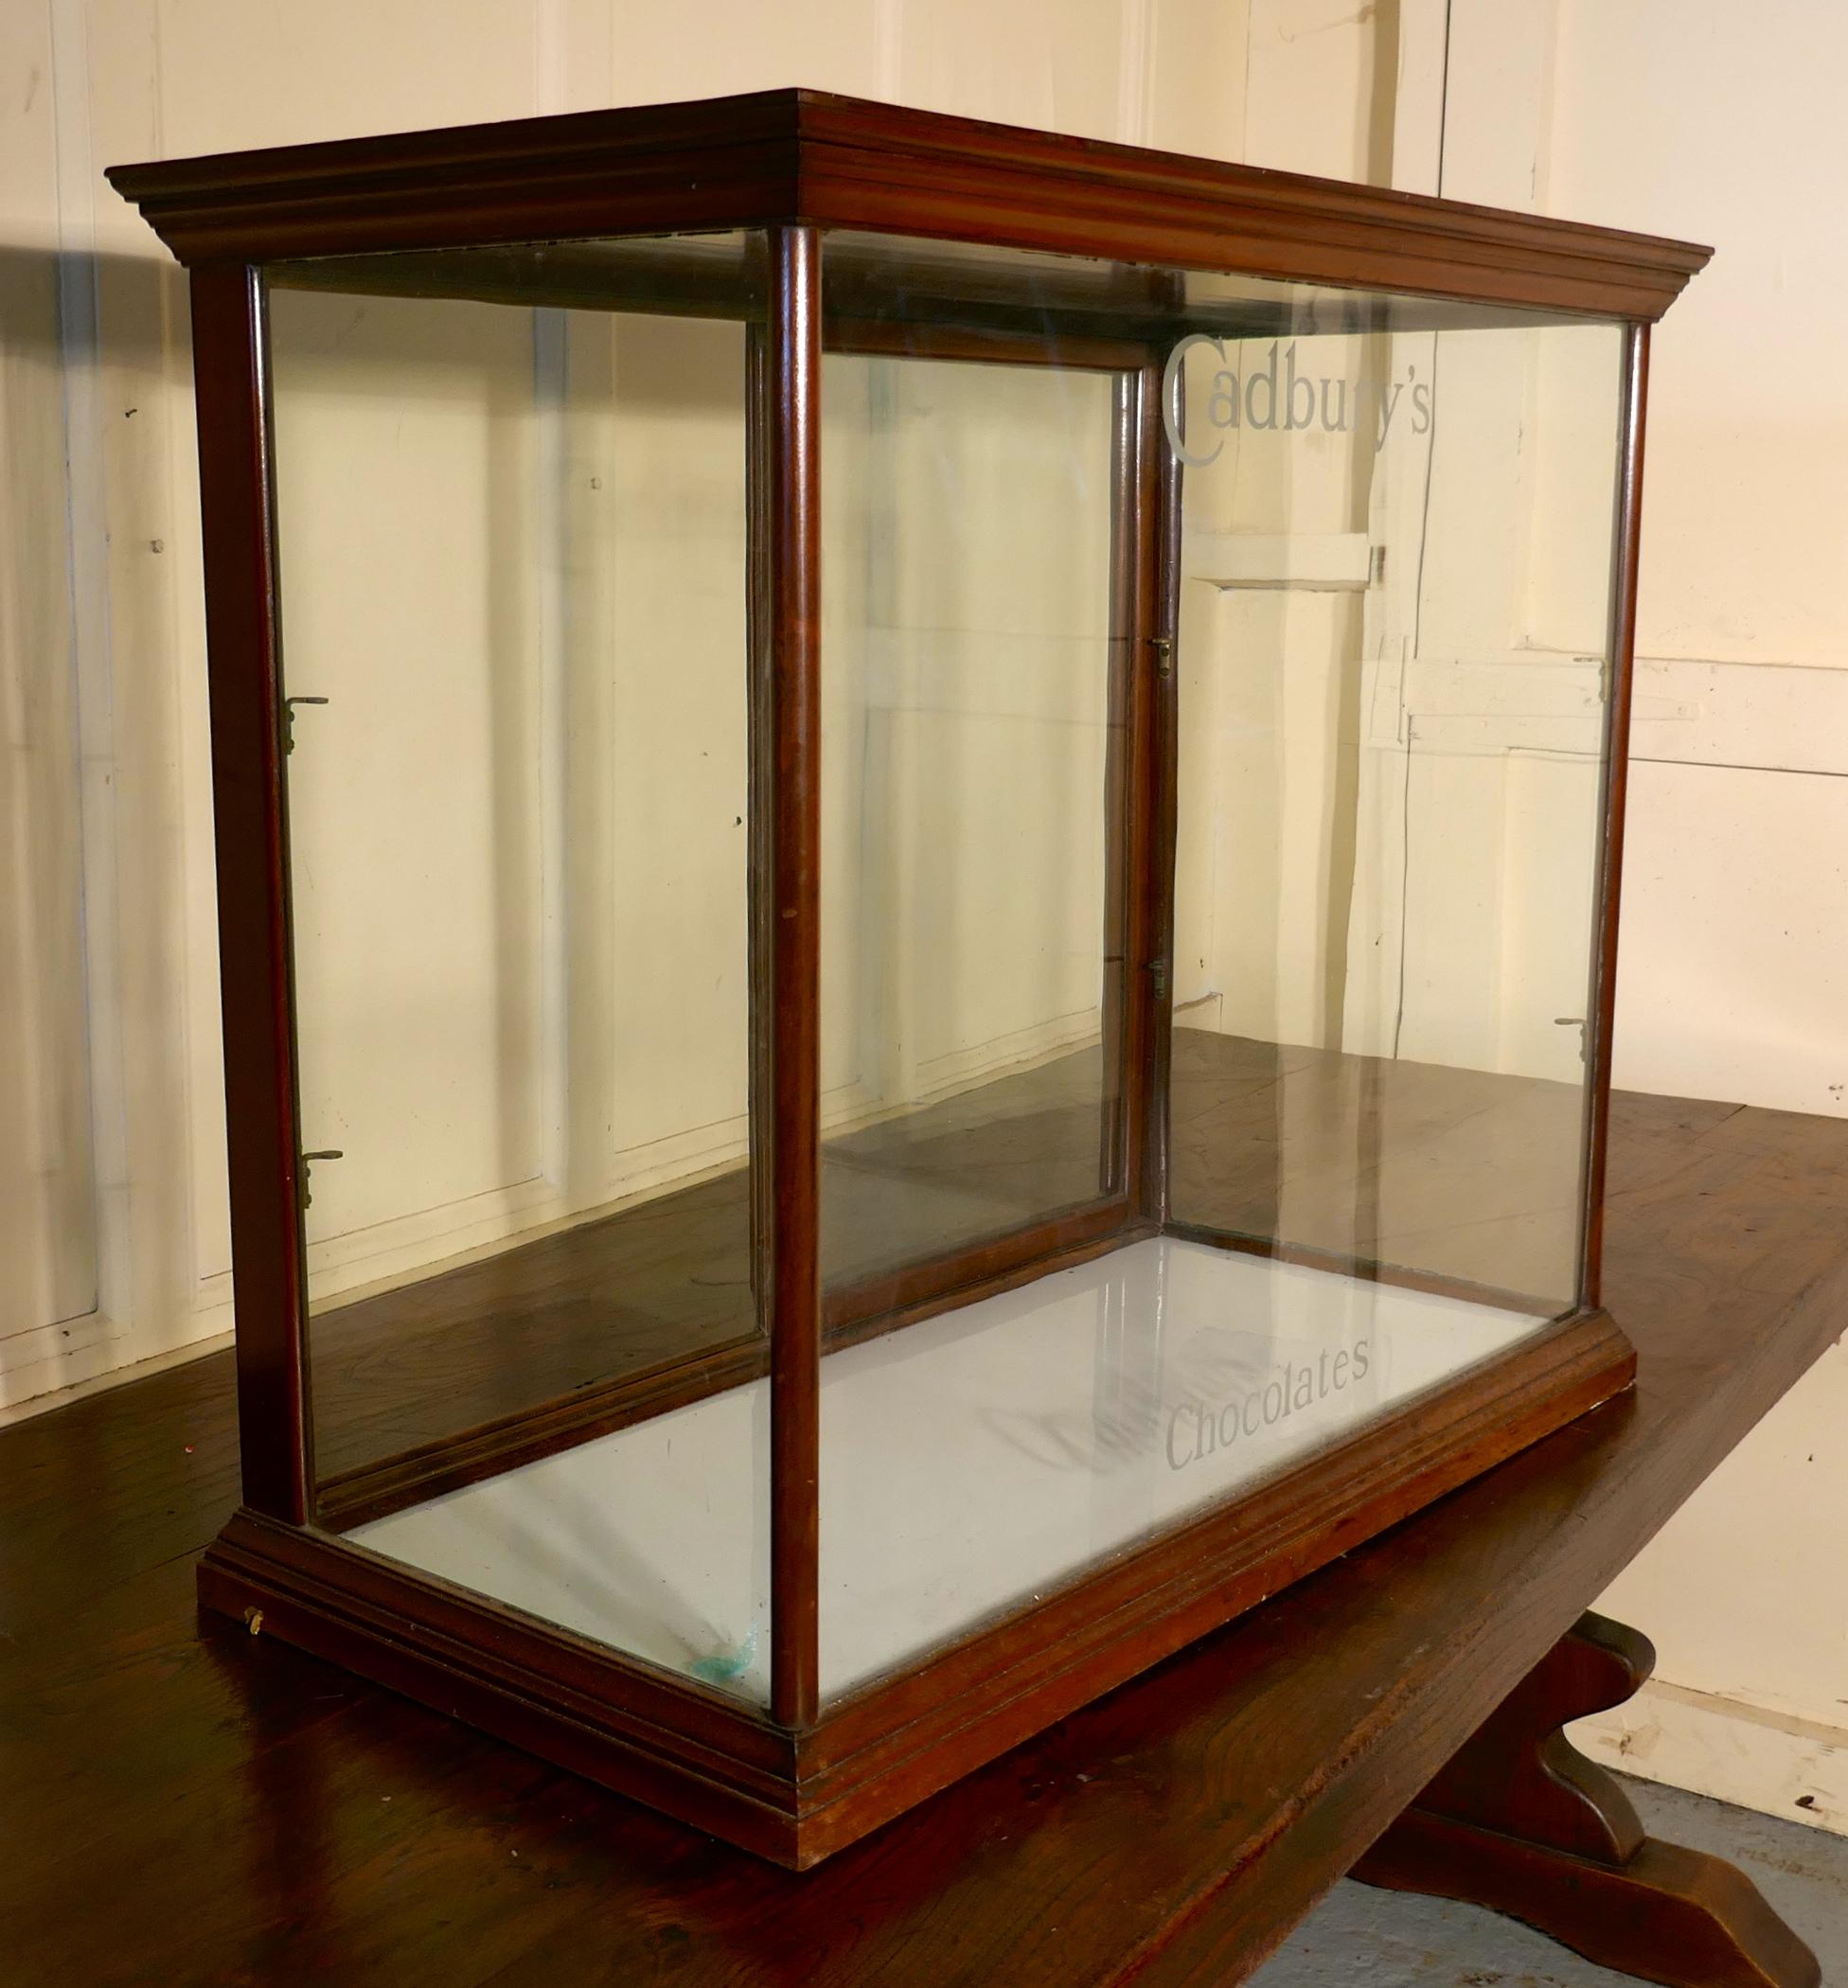 Early 20th Century Edwardian Cadbury’s Counter Top Sweet Shop Display Cabinet For Sale